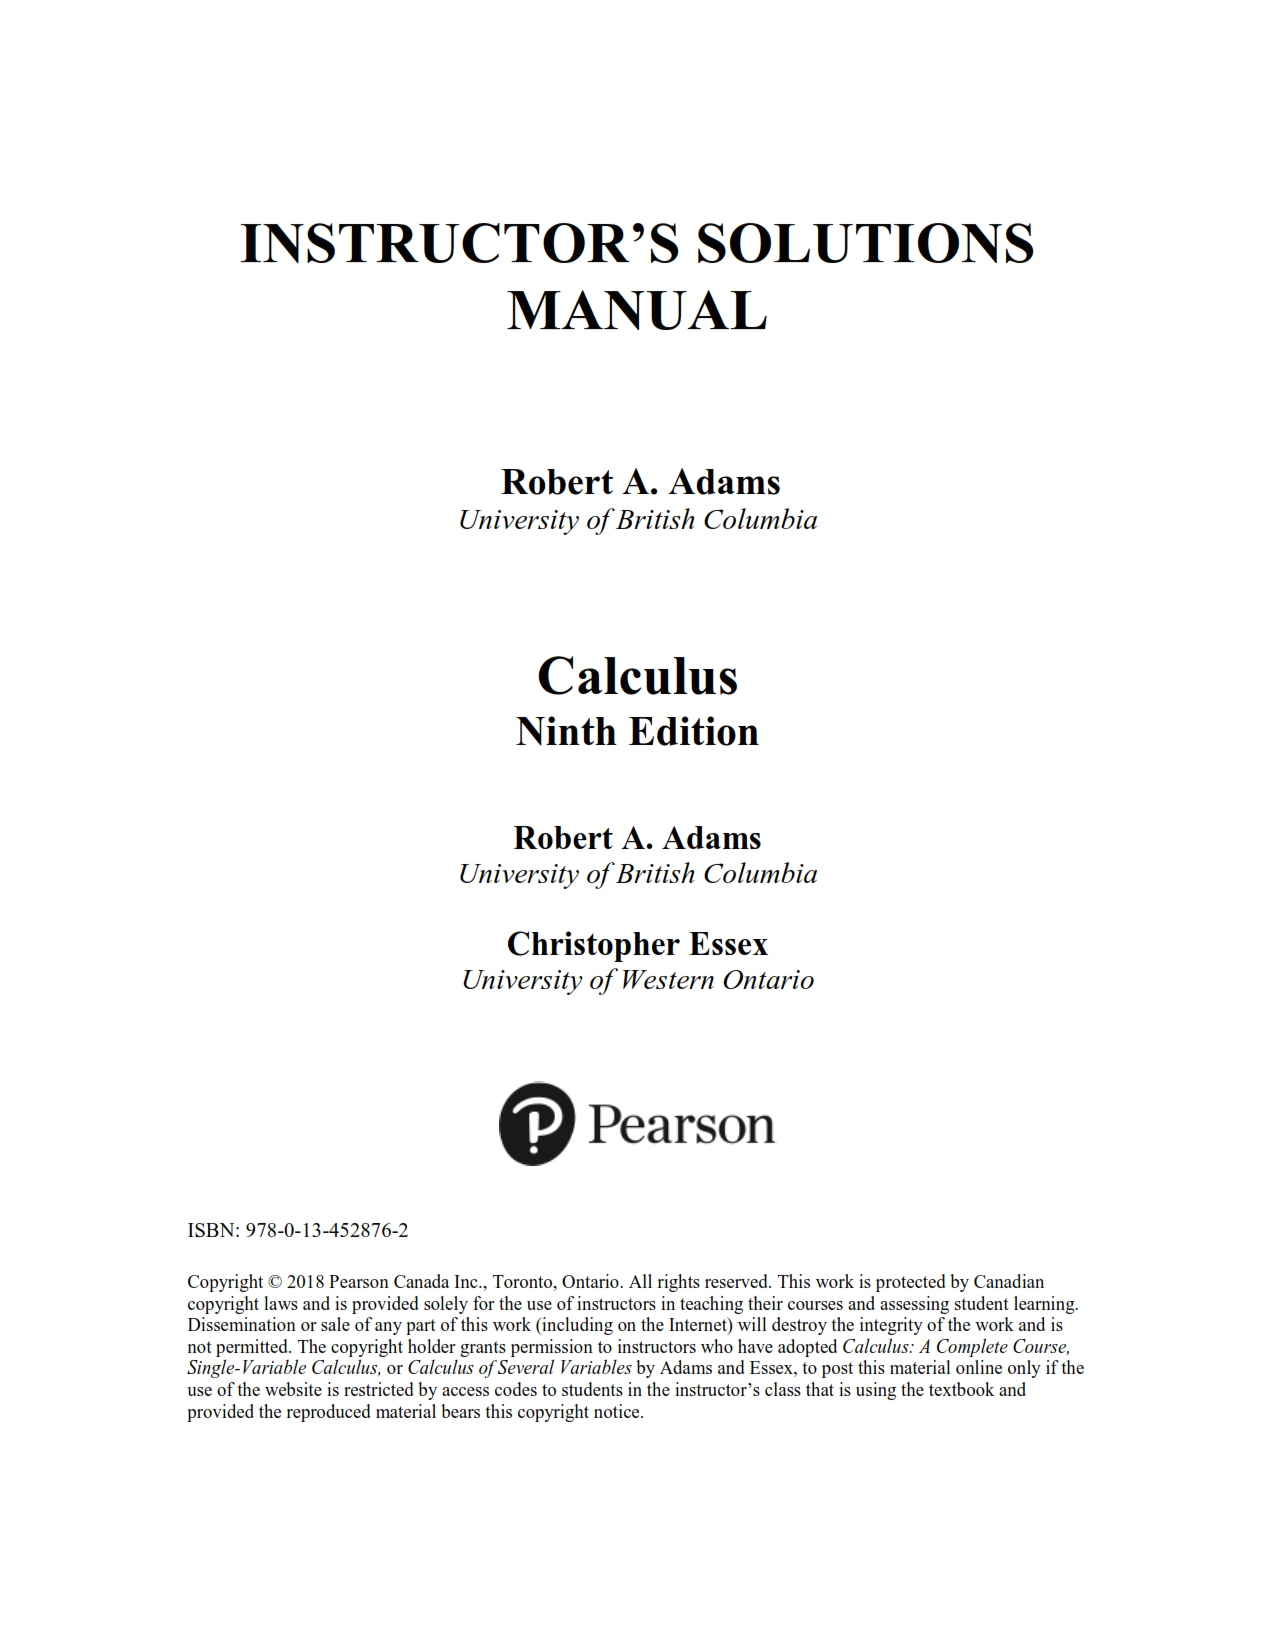 Download free calculus a complete course 9th ( ninth ) edition Adams student solution manual and answers pdf | Gioumeh solutions